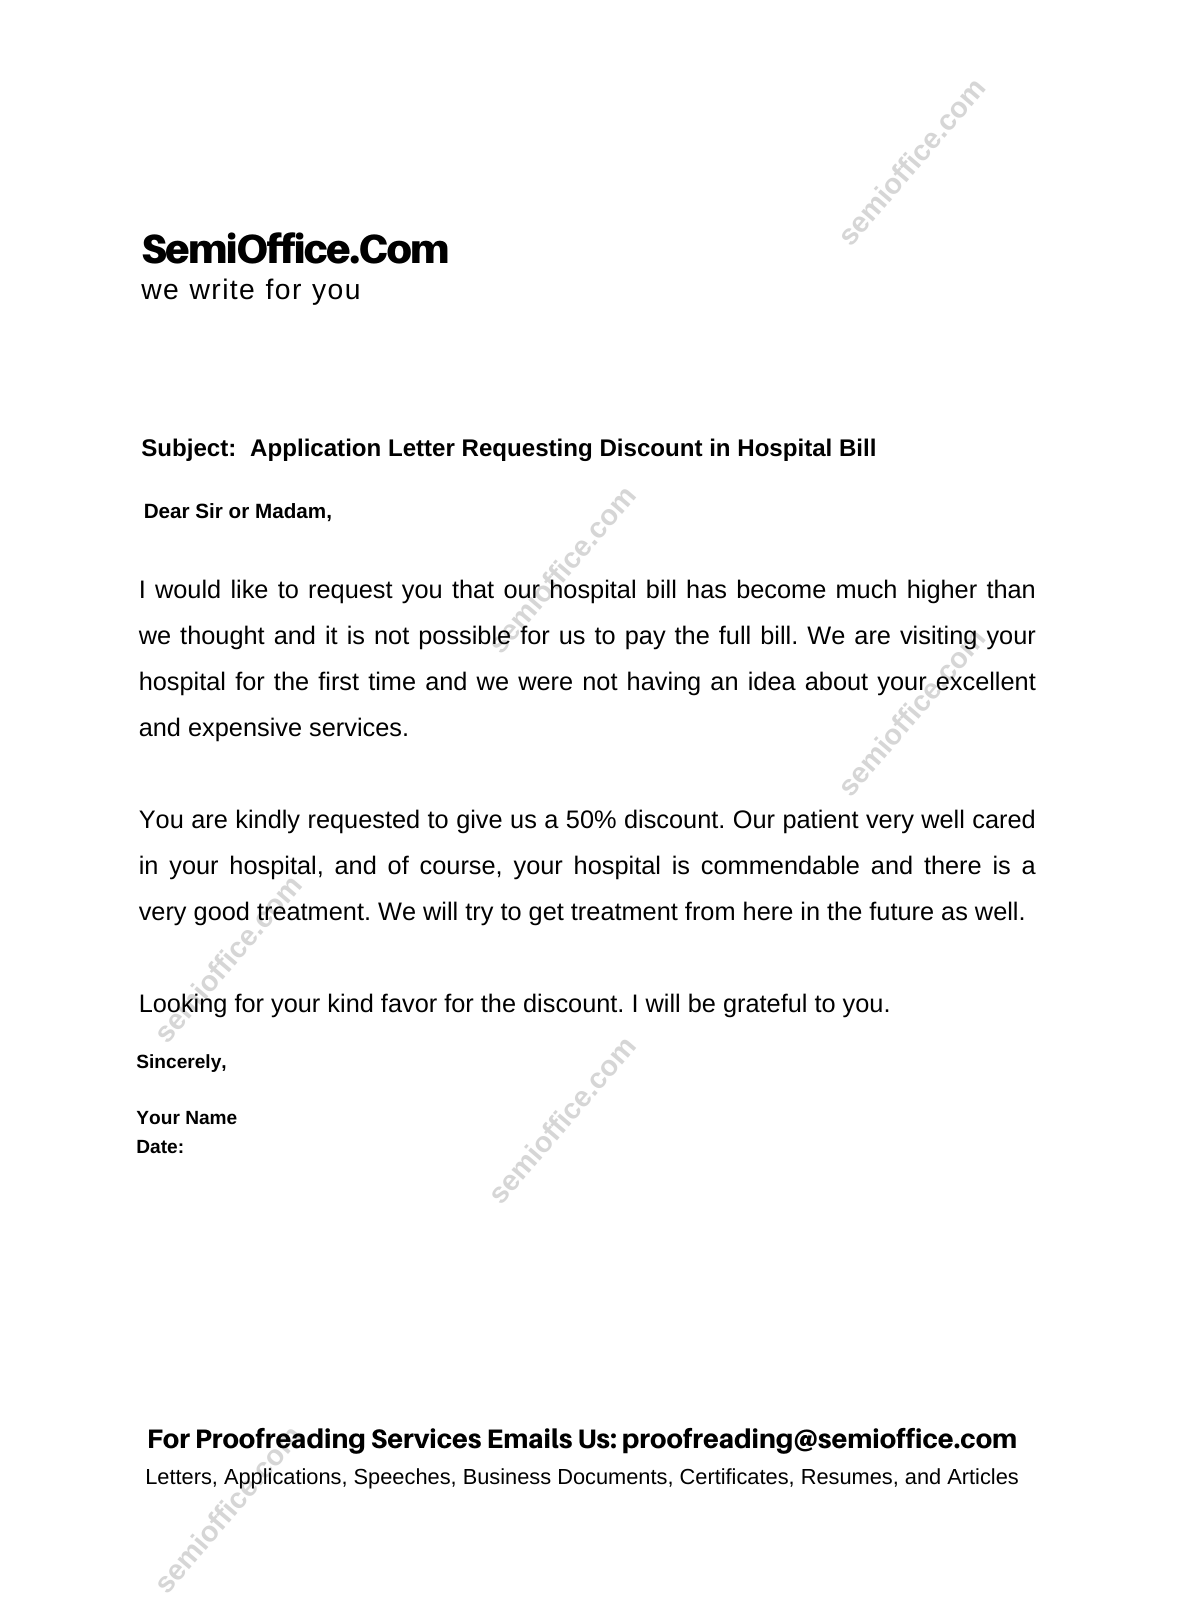 letter-to-request-for-discount-in-hospital-bill-semioffice-com